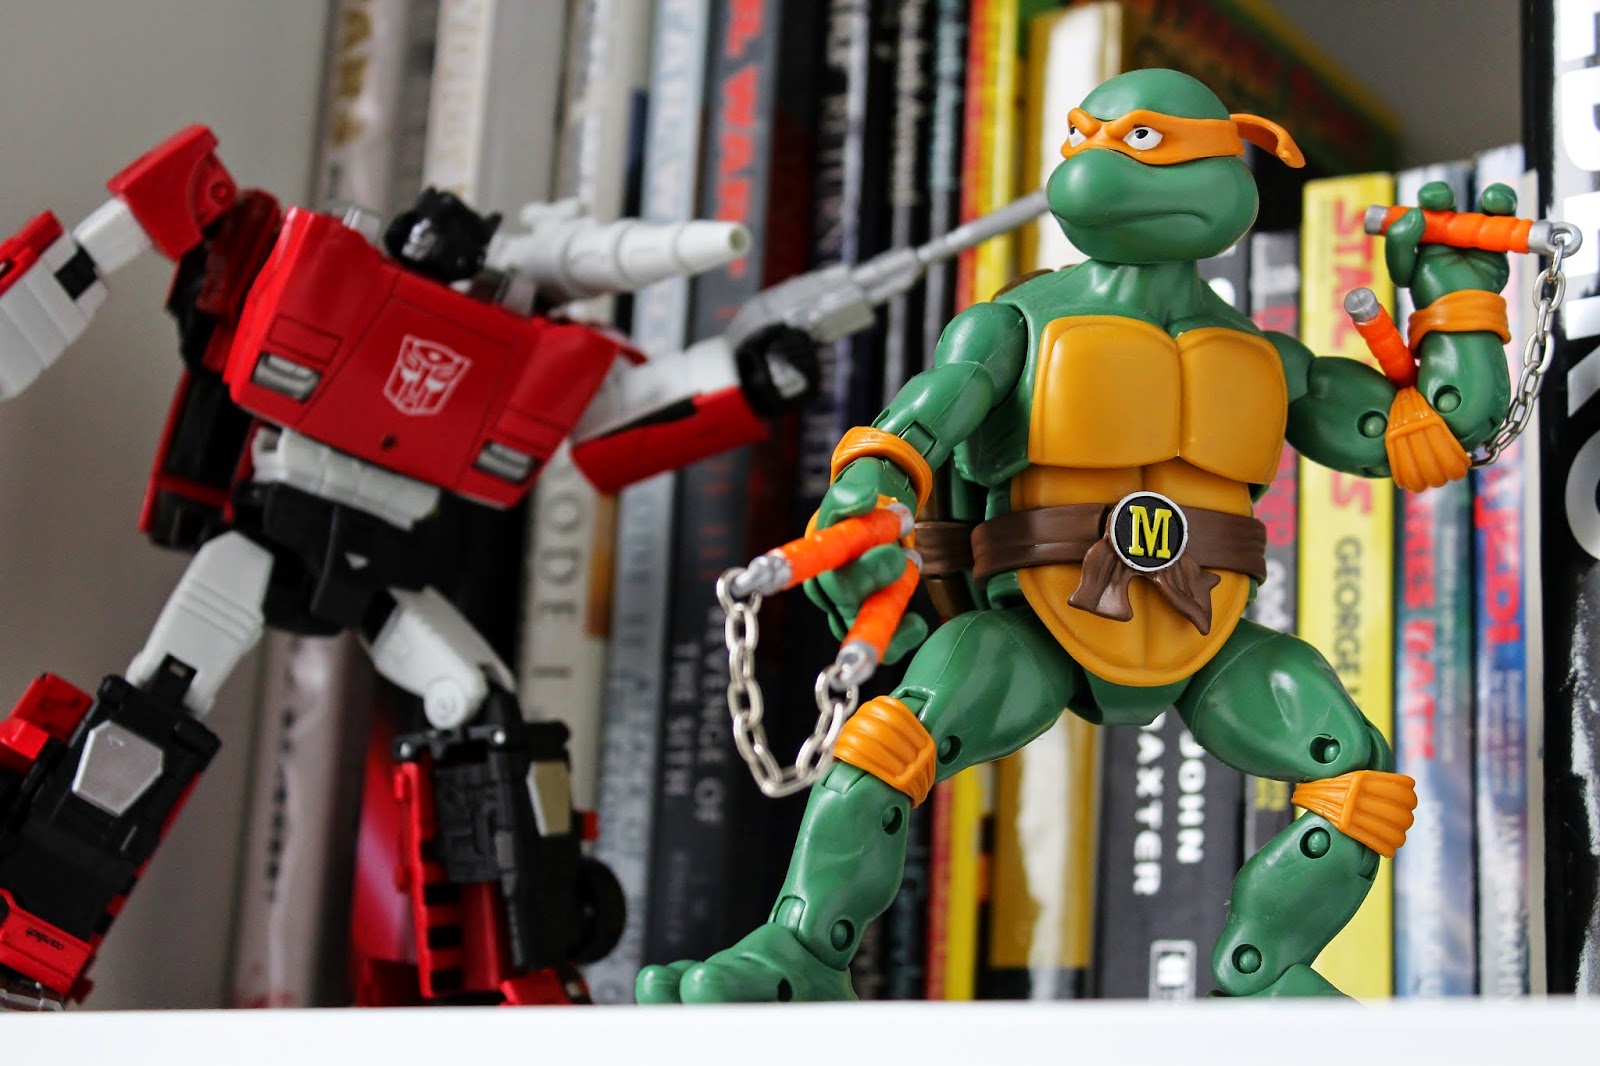 Transformers Masterpiece Sideswipe and TMNT Classics Michelangelo on the shelf | The Mos Espa Collection